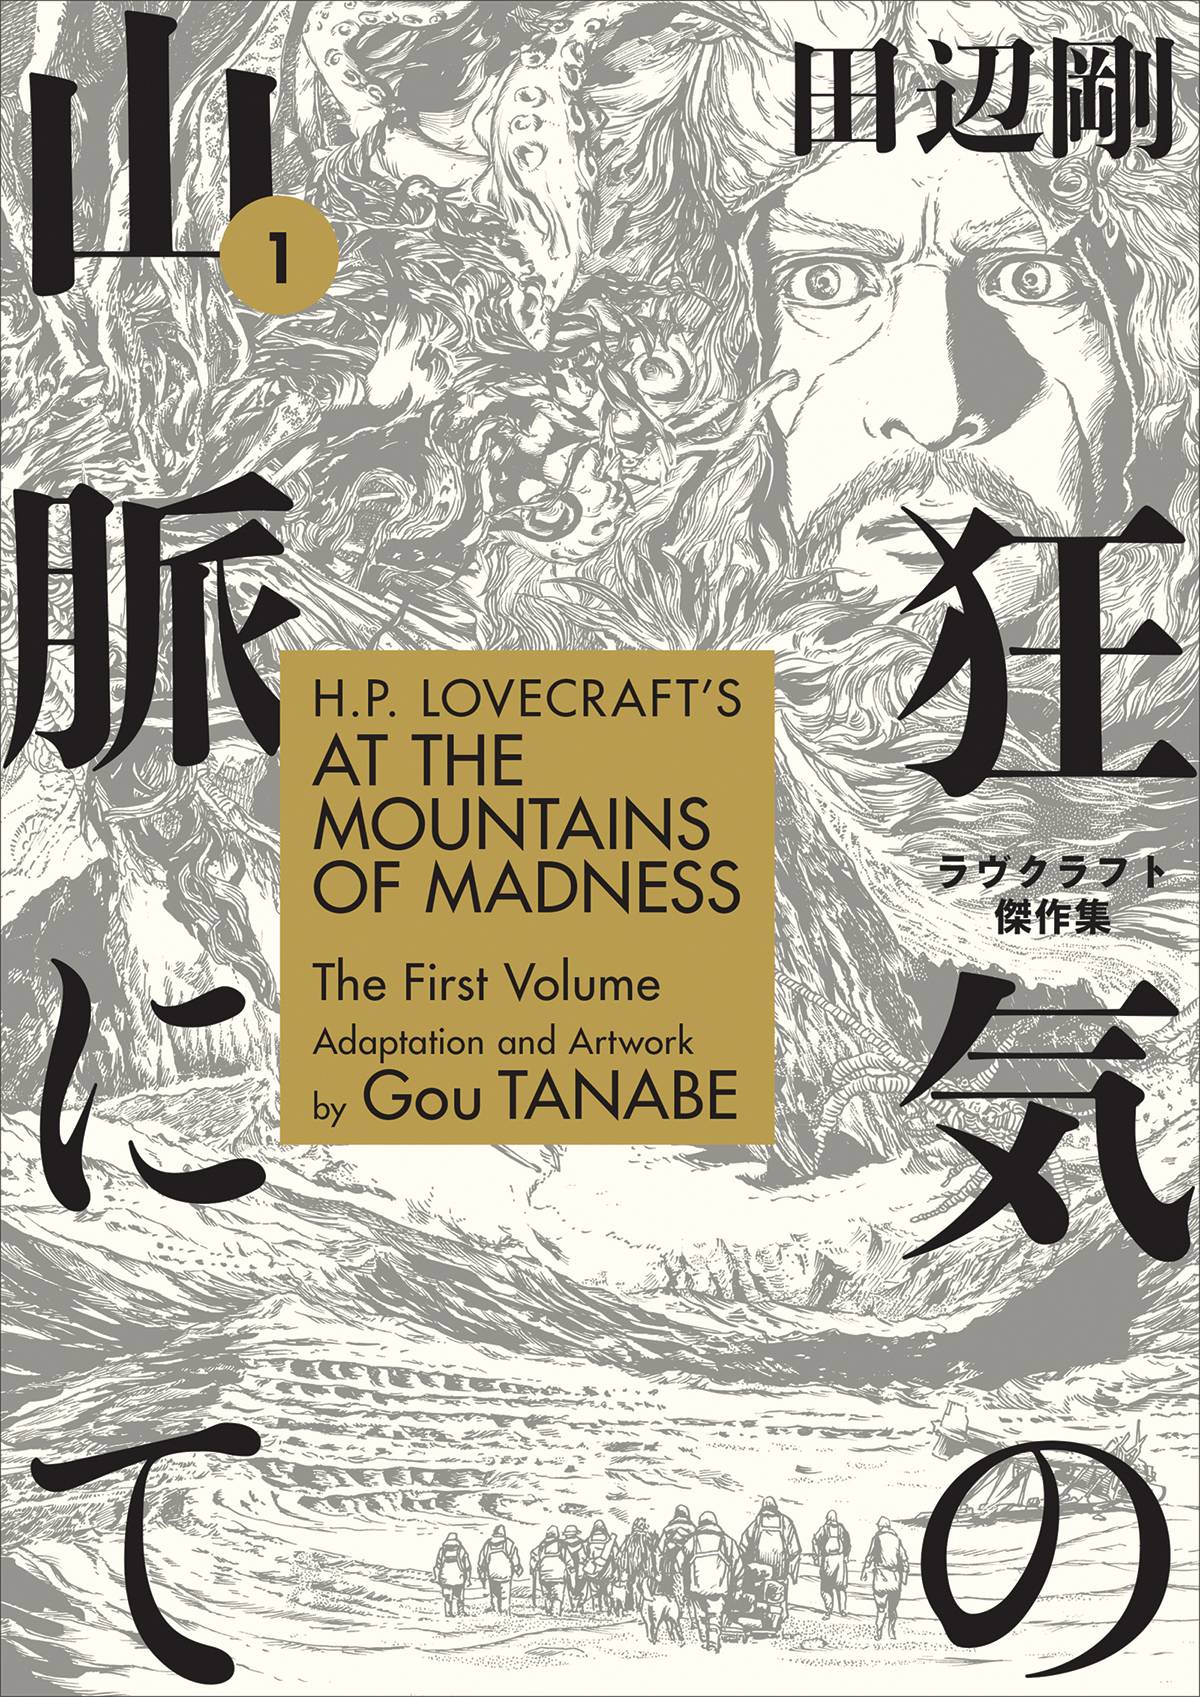 H.P. Lovecraft's At The Mountains Of Madness vol 1